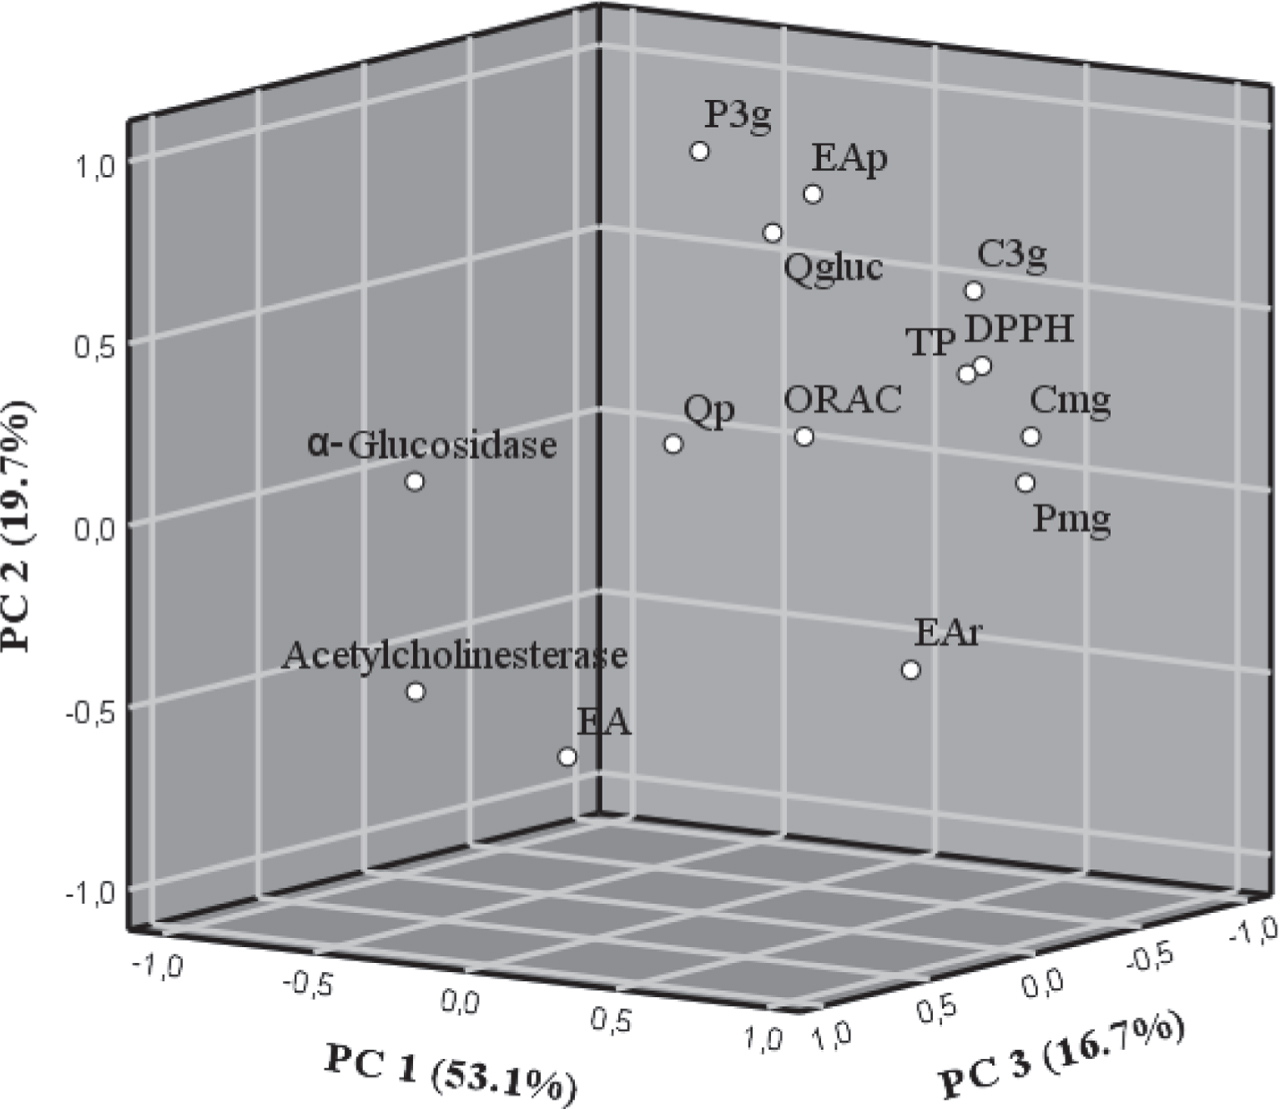 Principal component analysis (with varimax rotation) of the phytochemical composition of F. chiloensis spp. chiloensis f. chiloensis of two season and two different localities from Chile. Loading plot of PC1 versus PC2 versus PC3; In the loading plot: TP, total phenolics; C3g, cyanidin 3-O-glucoside; P3g, pelargonidin 3-O-glucoside; Cmg, cyanidin malonyl-glucoside; Pmg, pelargonidin malonyl-glucoside; EAp, ellagic acid pentoside; EAr, ellagic acid rhamnoside; EA, ellagic acid; Qp, quercetin pentoside; Qgluc, quercetin glucuronide.